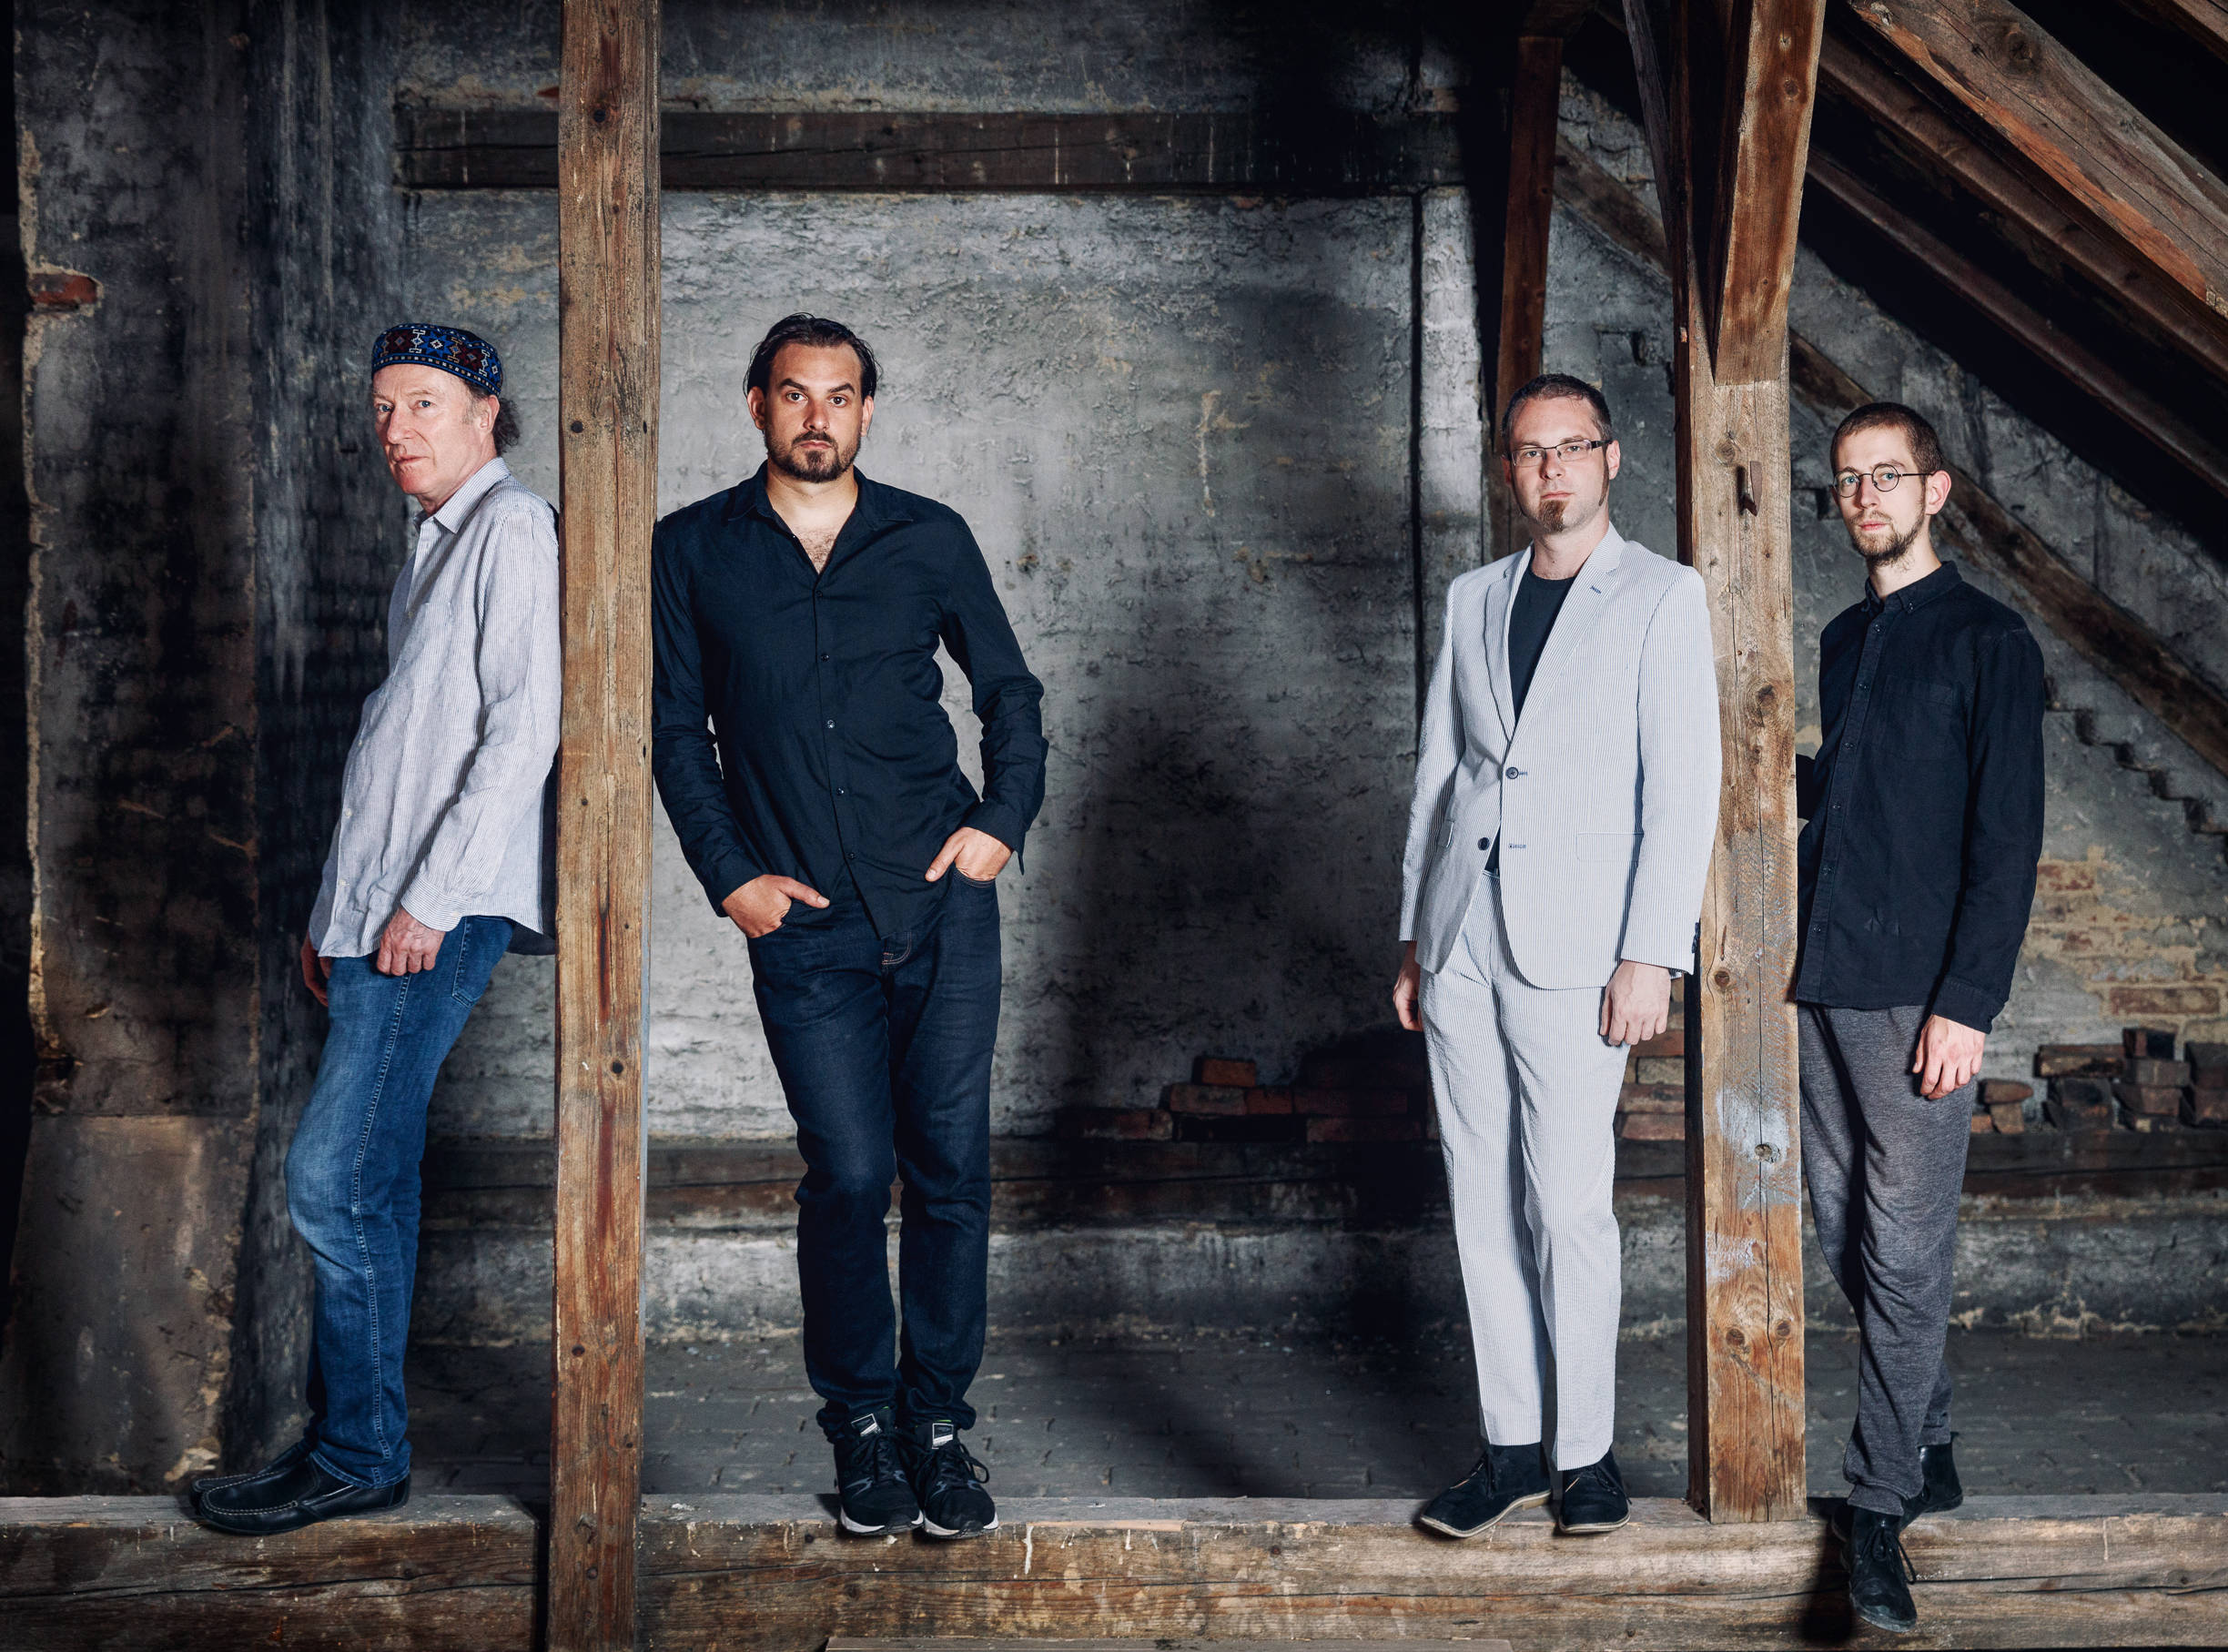 from left to right: Andi Schreibert (violin), Martin Bayer (guitar), Clemens Salesny (sax), Valentin Duit (drums). Photo credit: Maria Frodl, 2018